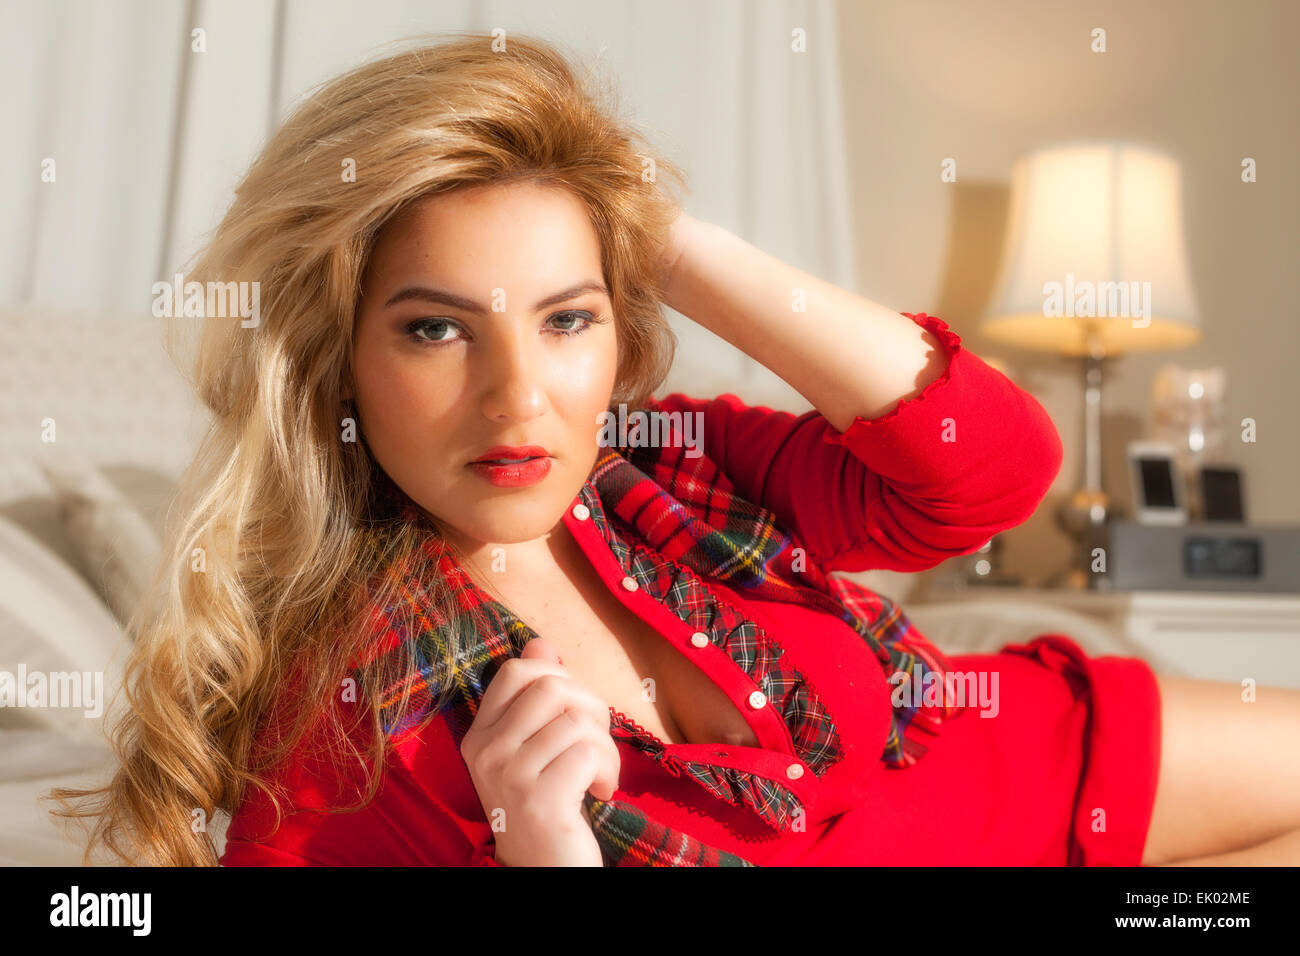 A pretty blonde Latina girl in red plaid Christmas clothes laying on her side with her hand in her big hair. Stock Photo